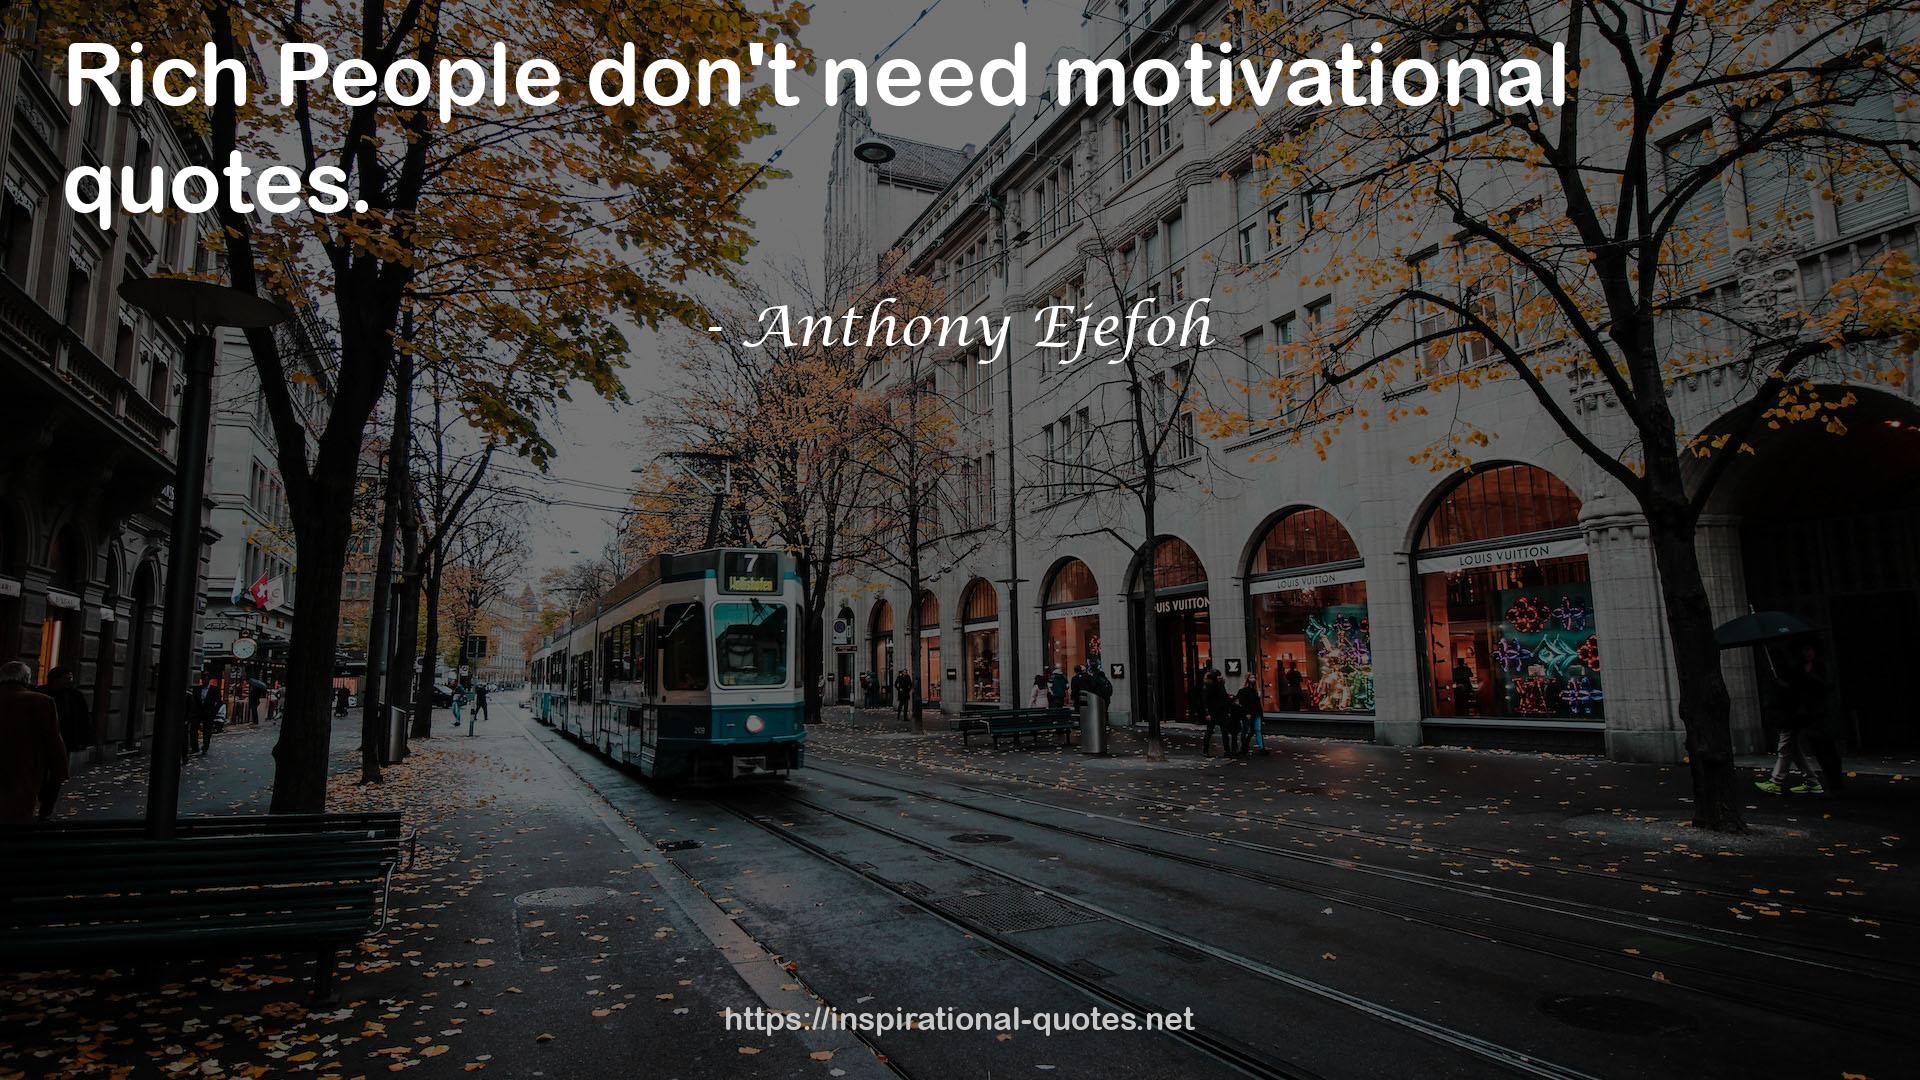 Anthony Ejefoh QUOTES